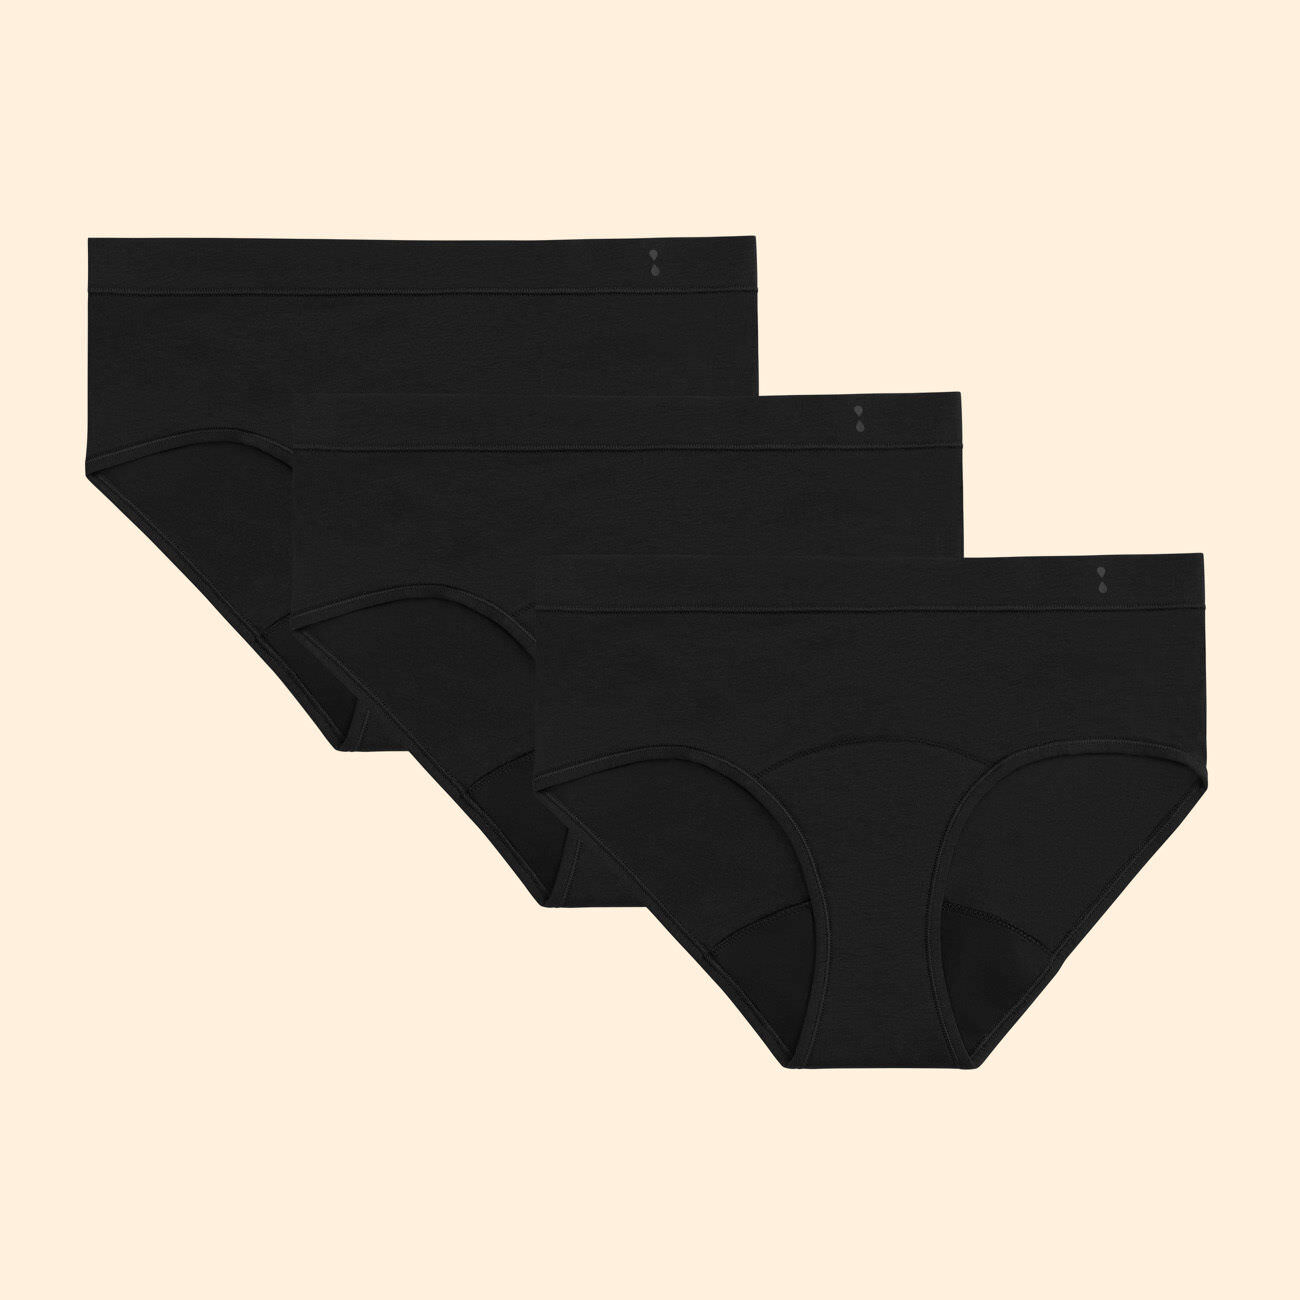  Thinx for All Brief 2-Pack Period Underwear for Women